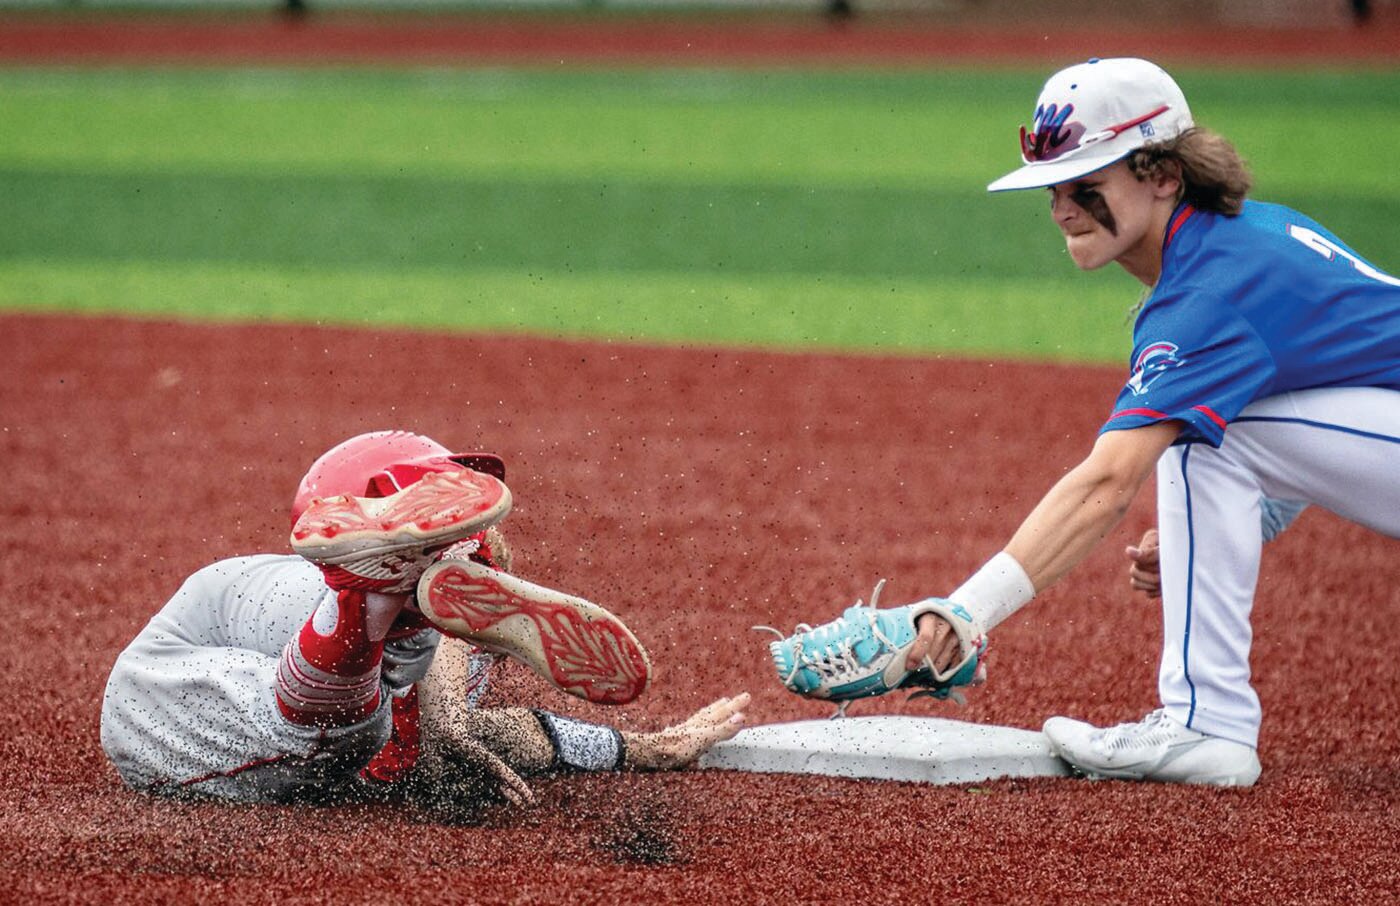 Moberly second baseman Braedon Hunt attempts to apply a tag during Saturday's Class 4 District 7 game at Macon High School. This marked Hunt's final scholastic game as Mexico defeated the Spartans, 11-1, in six innings.